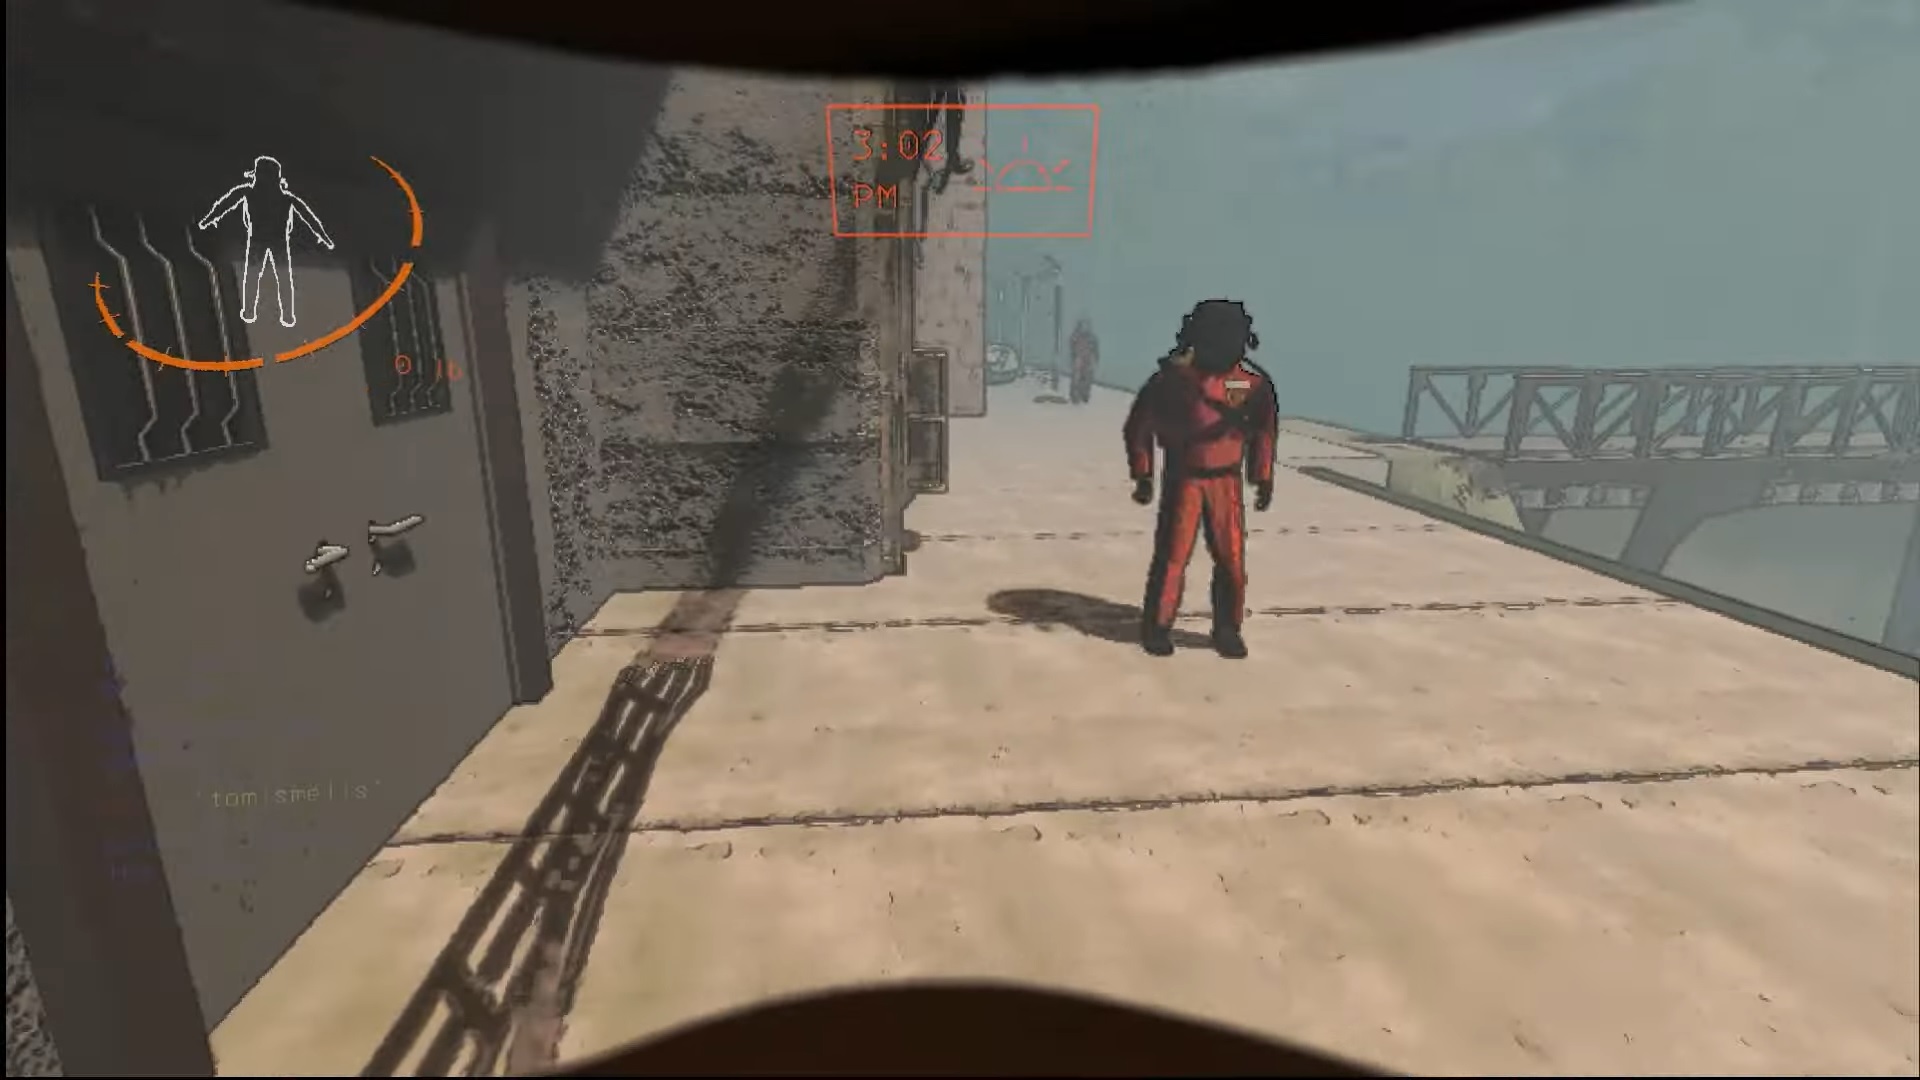 How To Play Lethal Company in VR